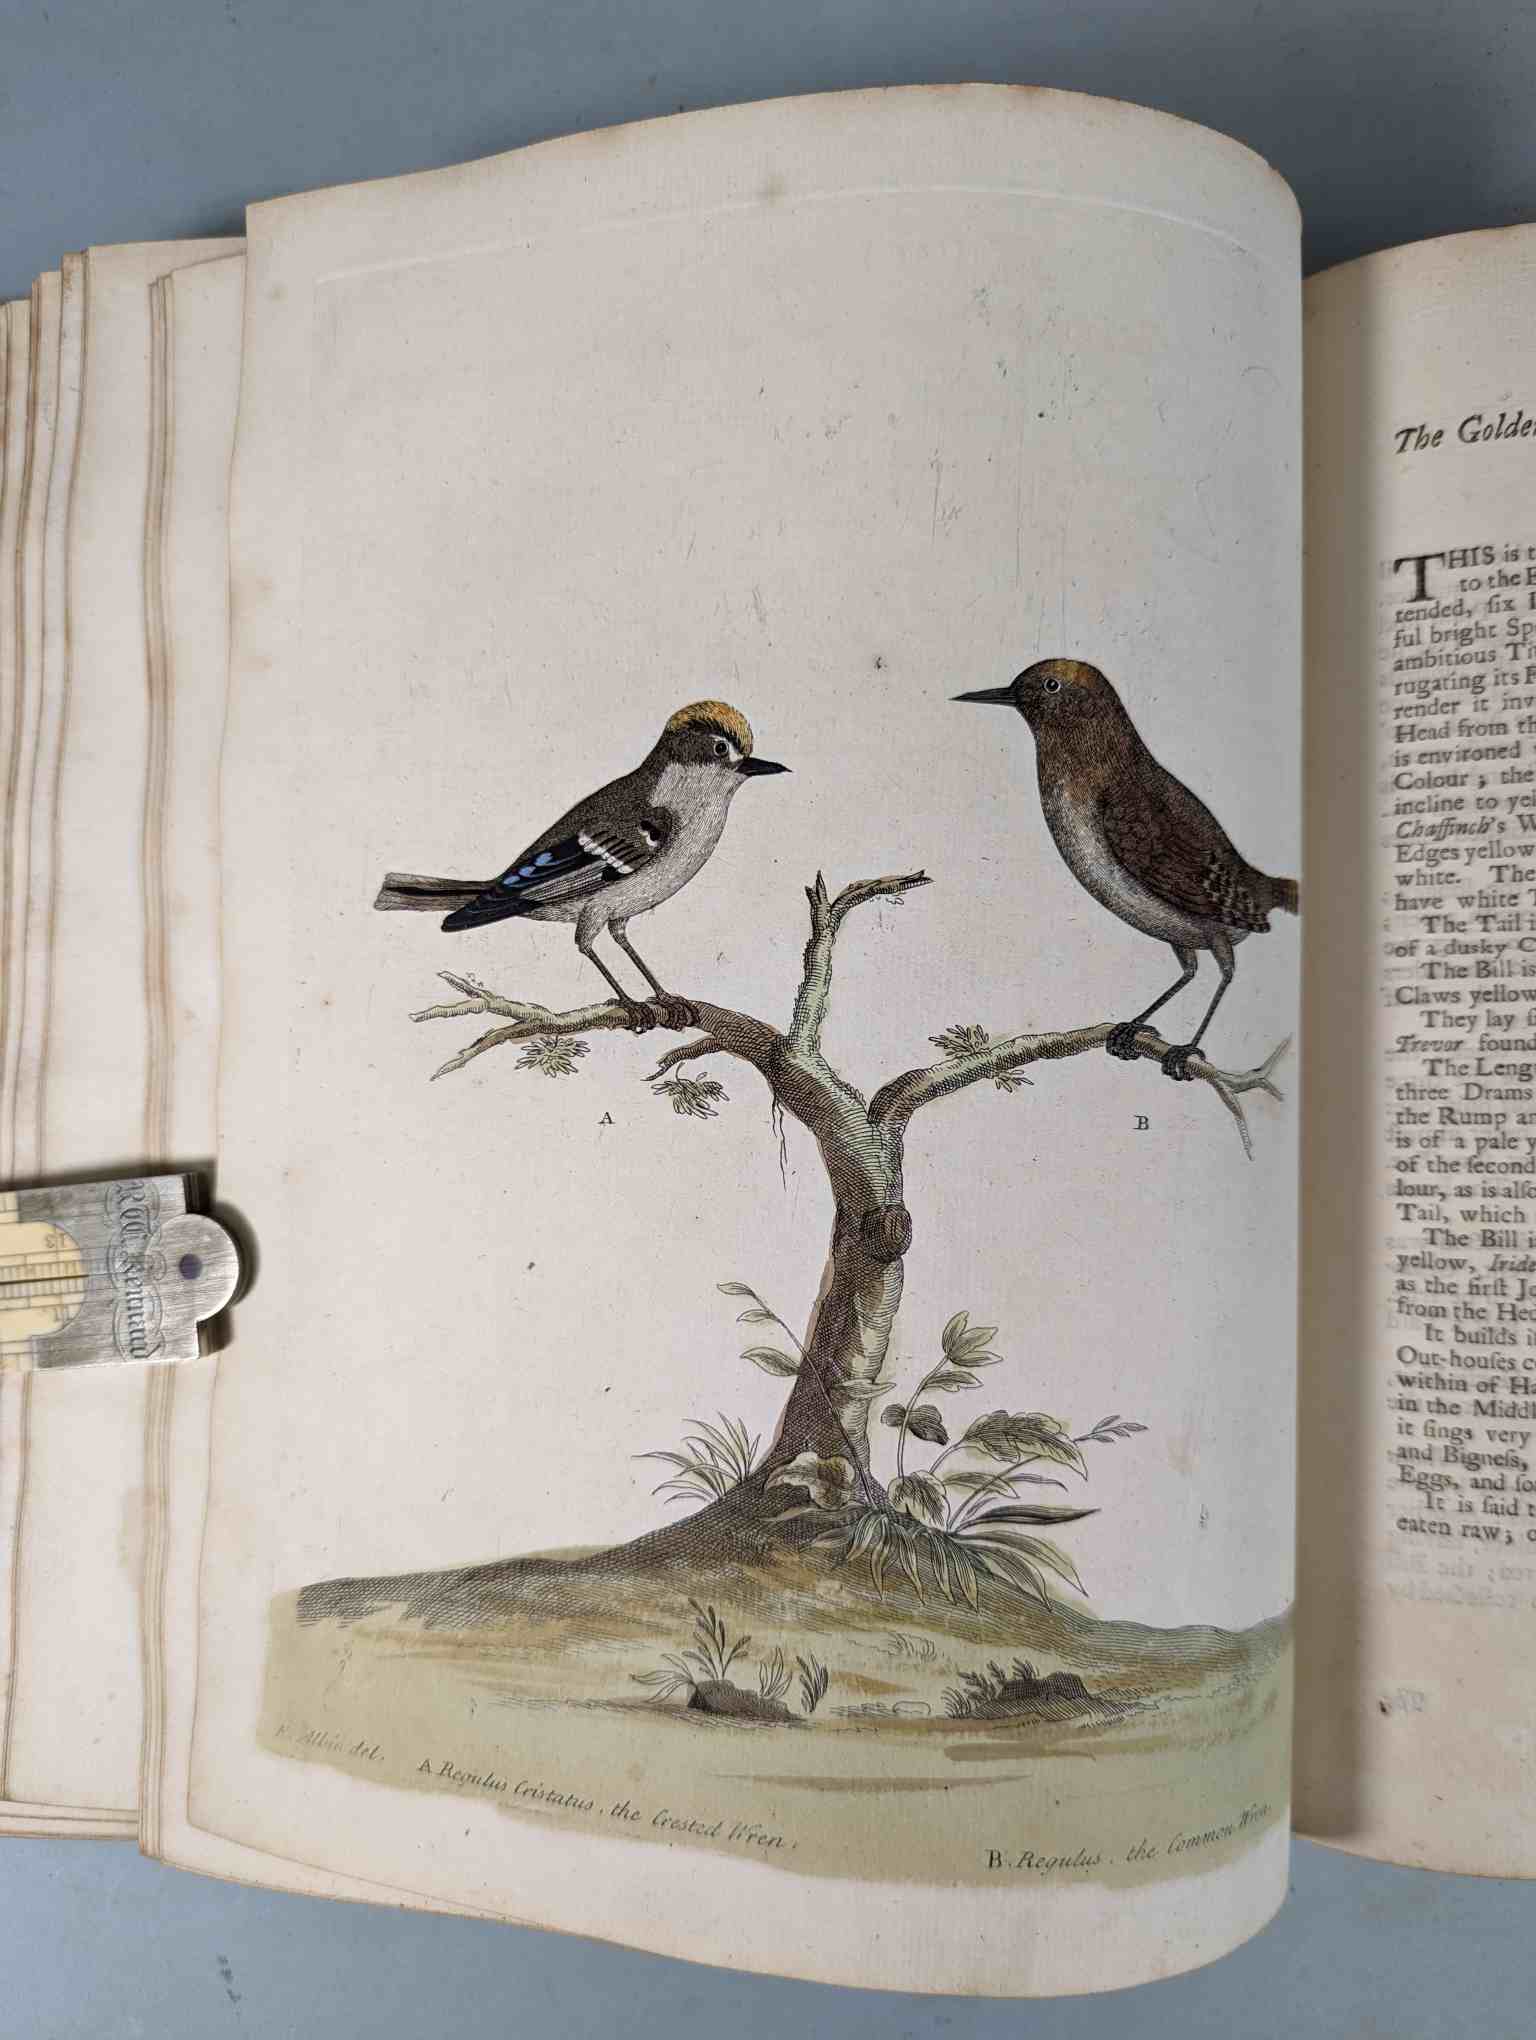 ALBIN, Eleazar. A Natural History of Birds, to which are added, Notes and Observations by W. - Image 56 of 208